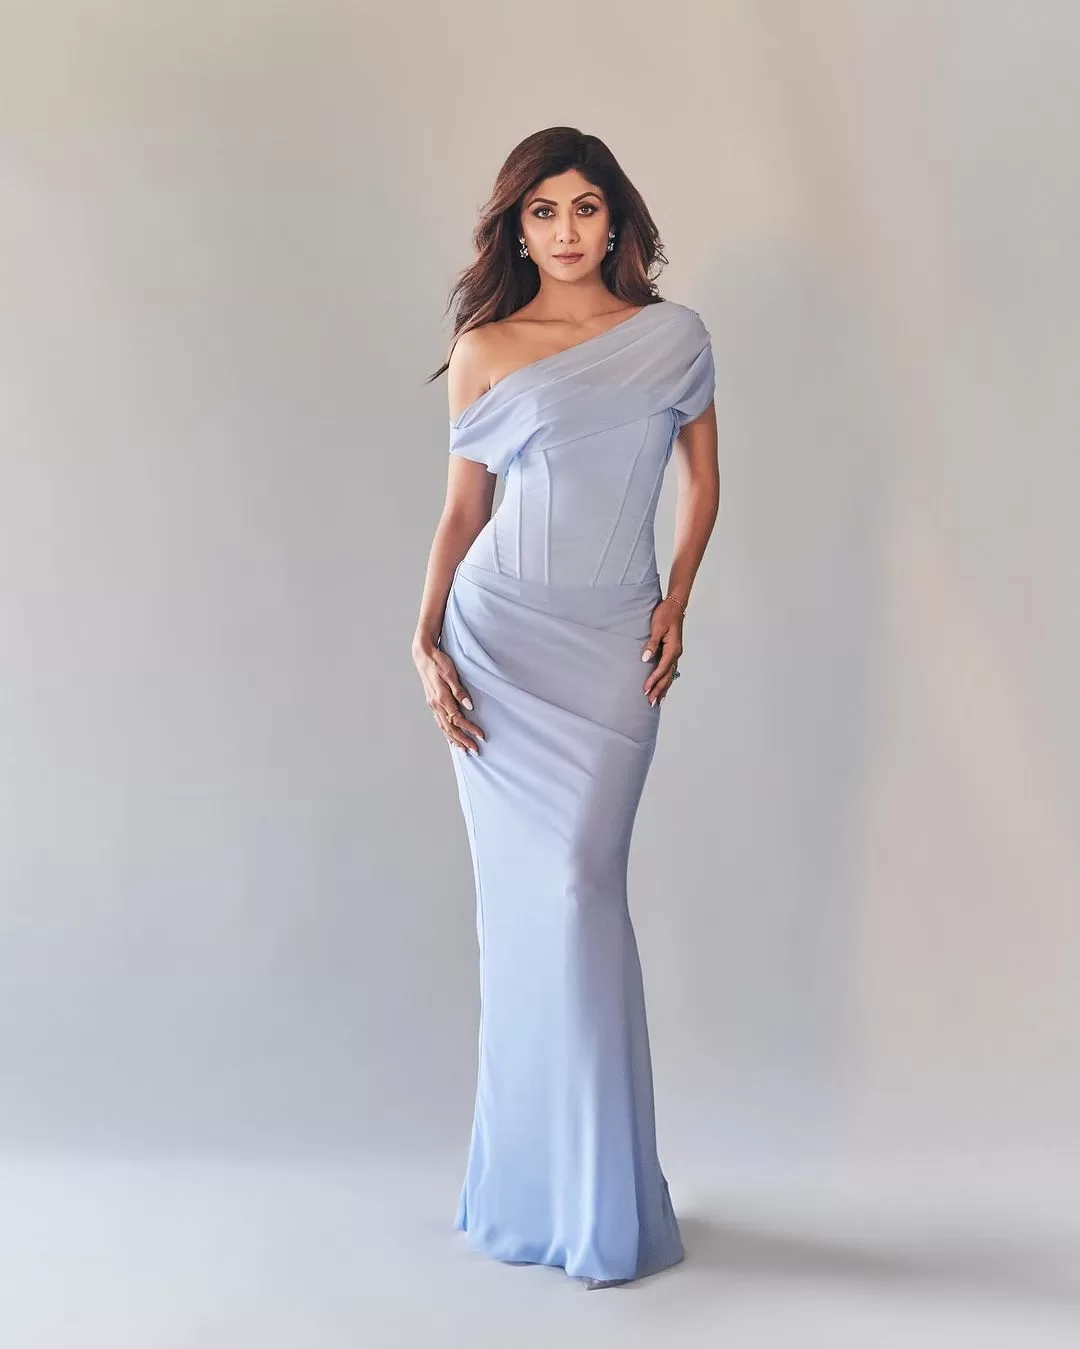 Shilpa Shetty Stuns in Mesmerizing Blue Gown: A Fashion Breakdown from Outfit to Accessories